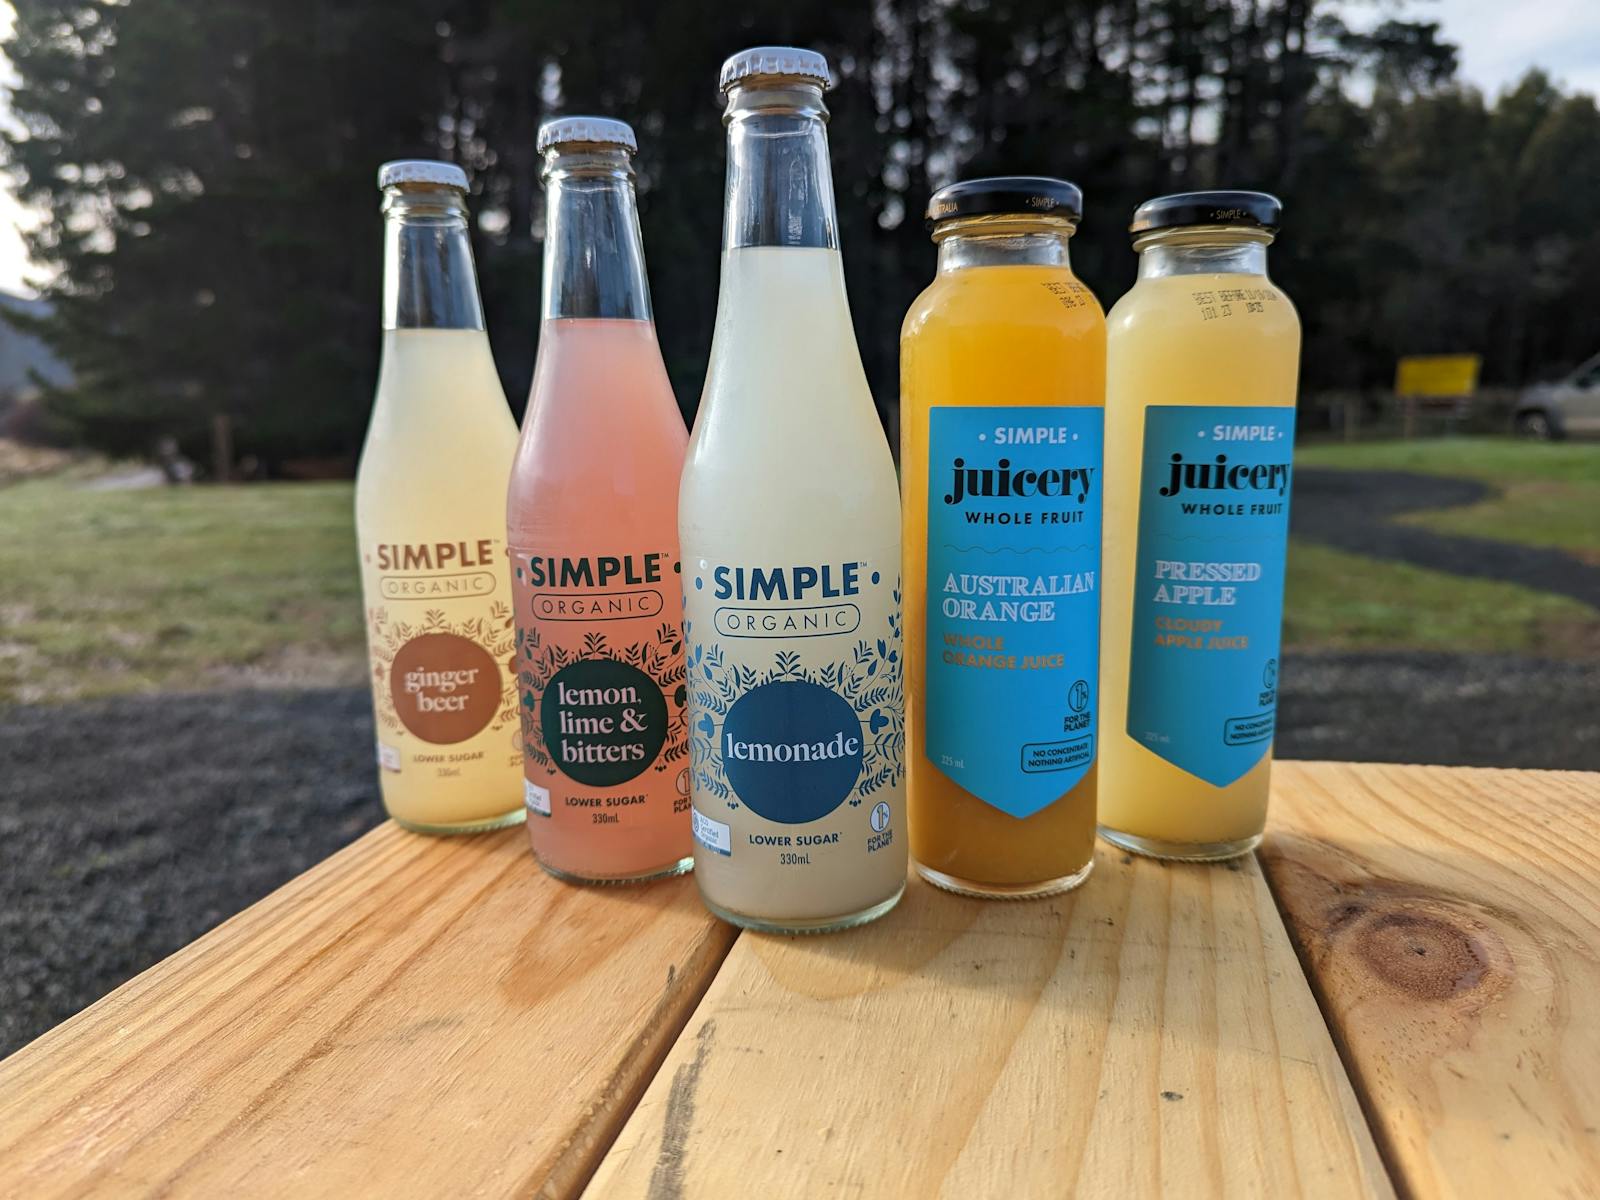 A selection of bottle juices and sodas